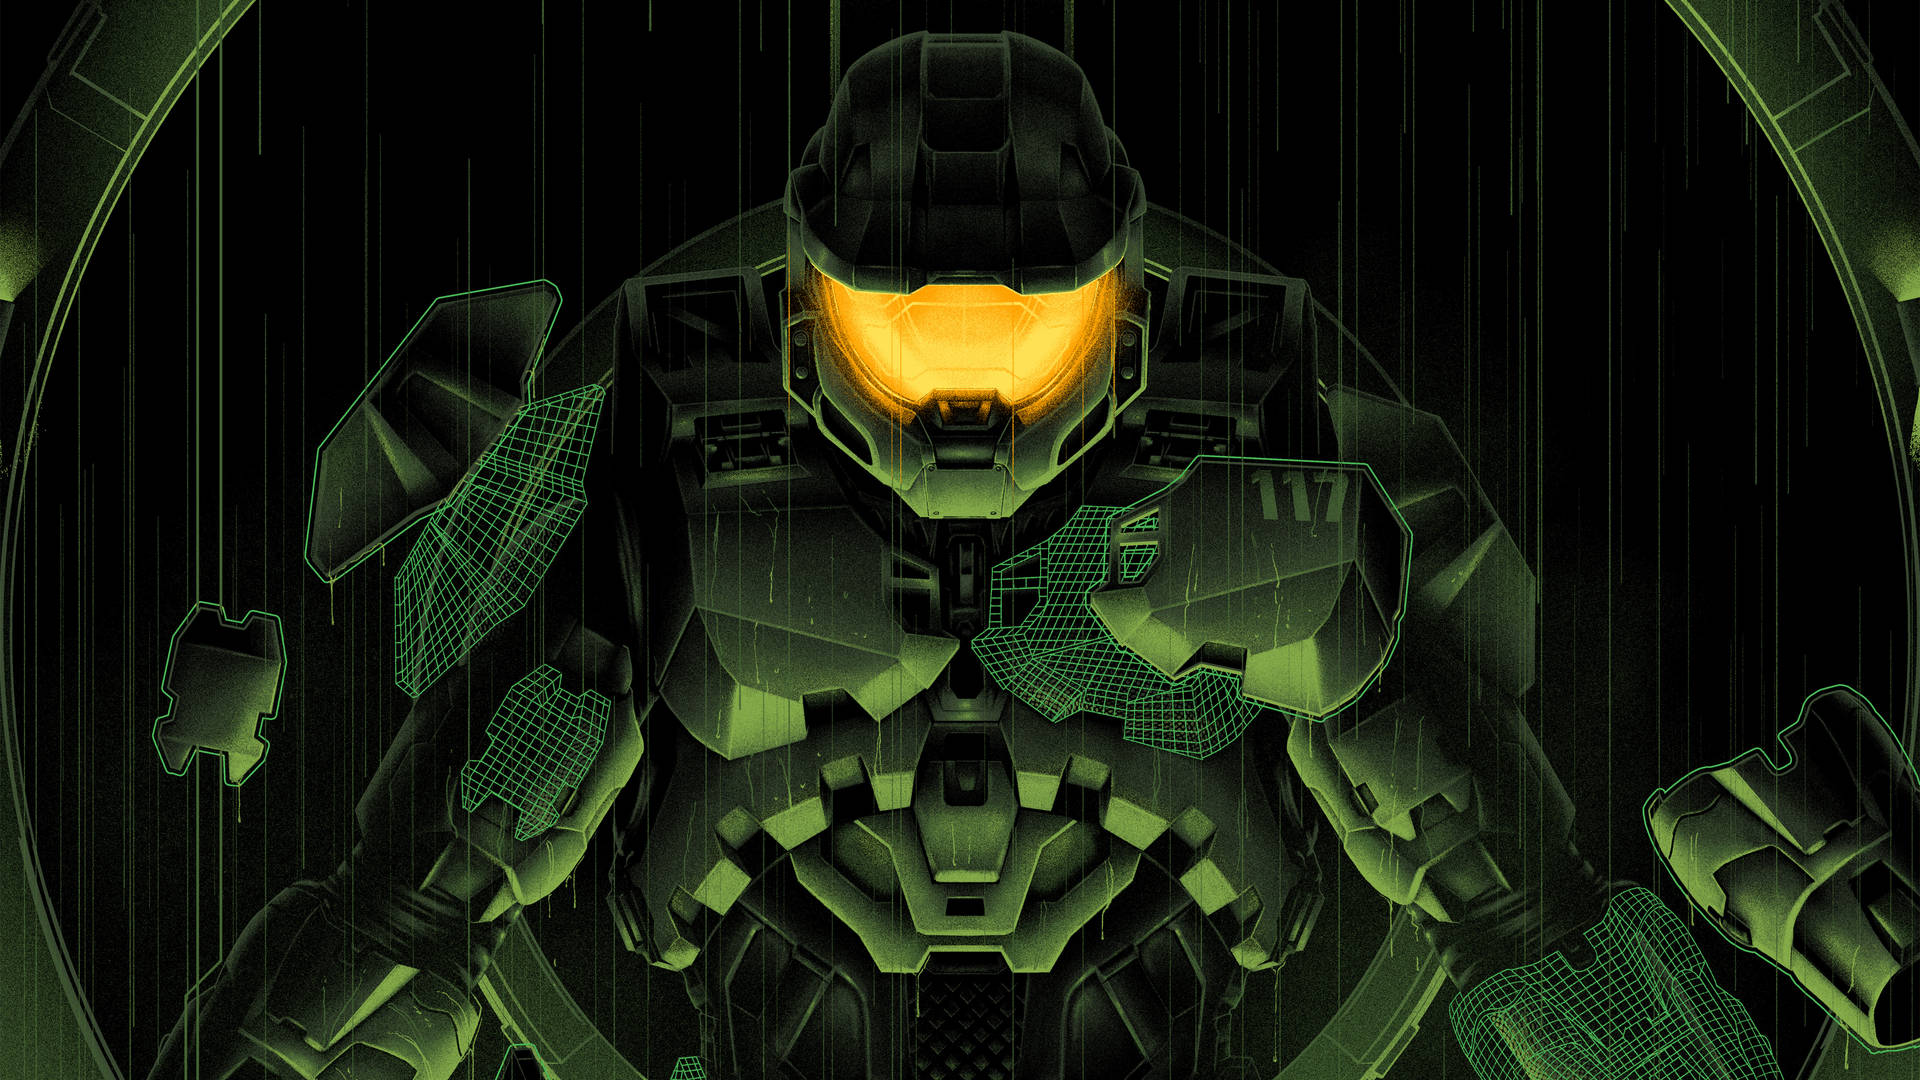 Top 999+ 4k Halo Wallpaper Full HD, 4K✅Free to Use